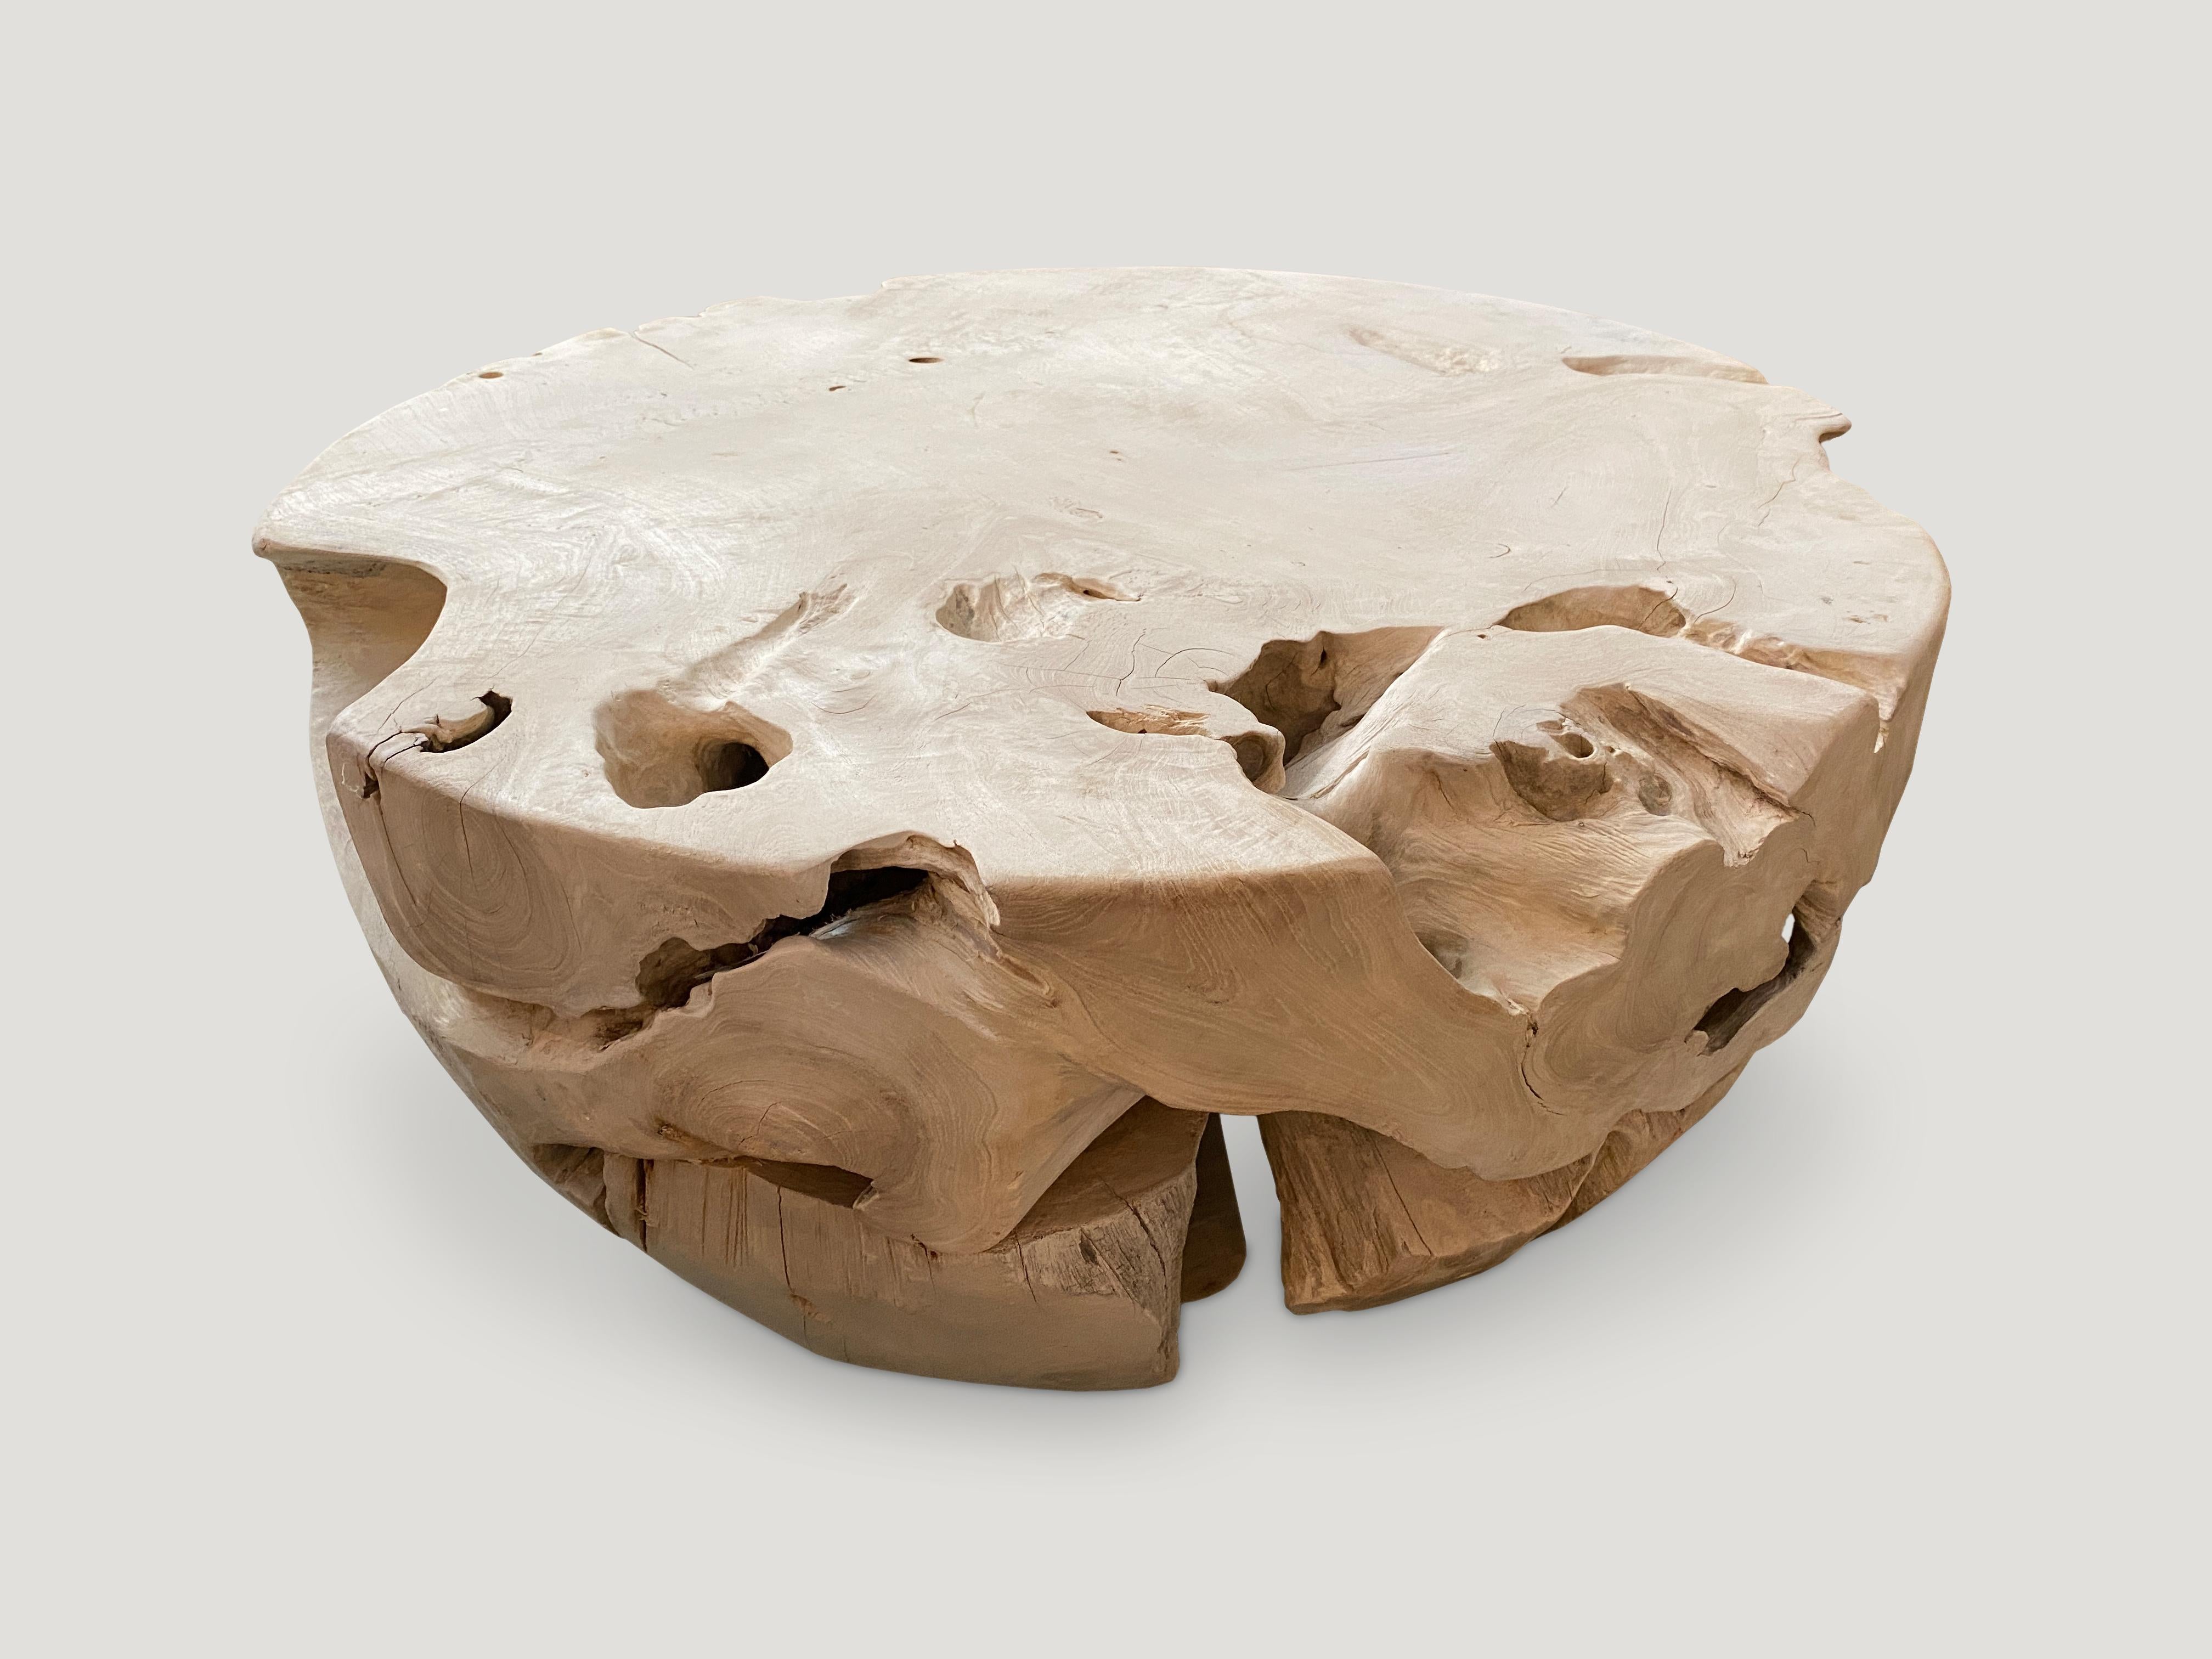 Organic round reclaimed teak wood coffee table, bleached with a light white washed finish. Perfect for inside or outside living. We can also produce this shape charred or natural teak.

The St. Barts Collection features an exciting new line of